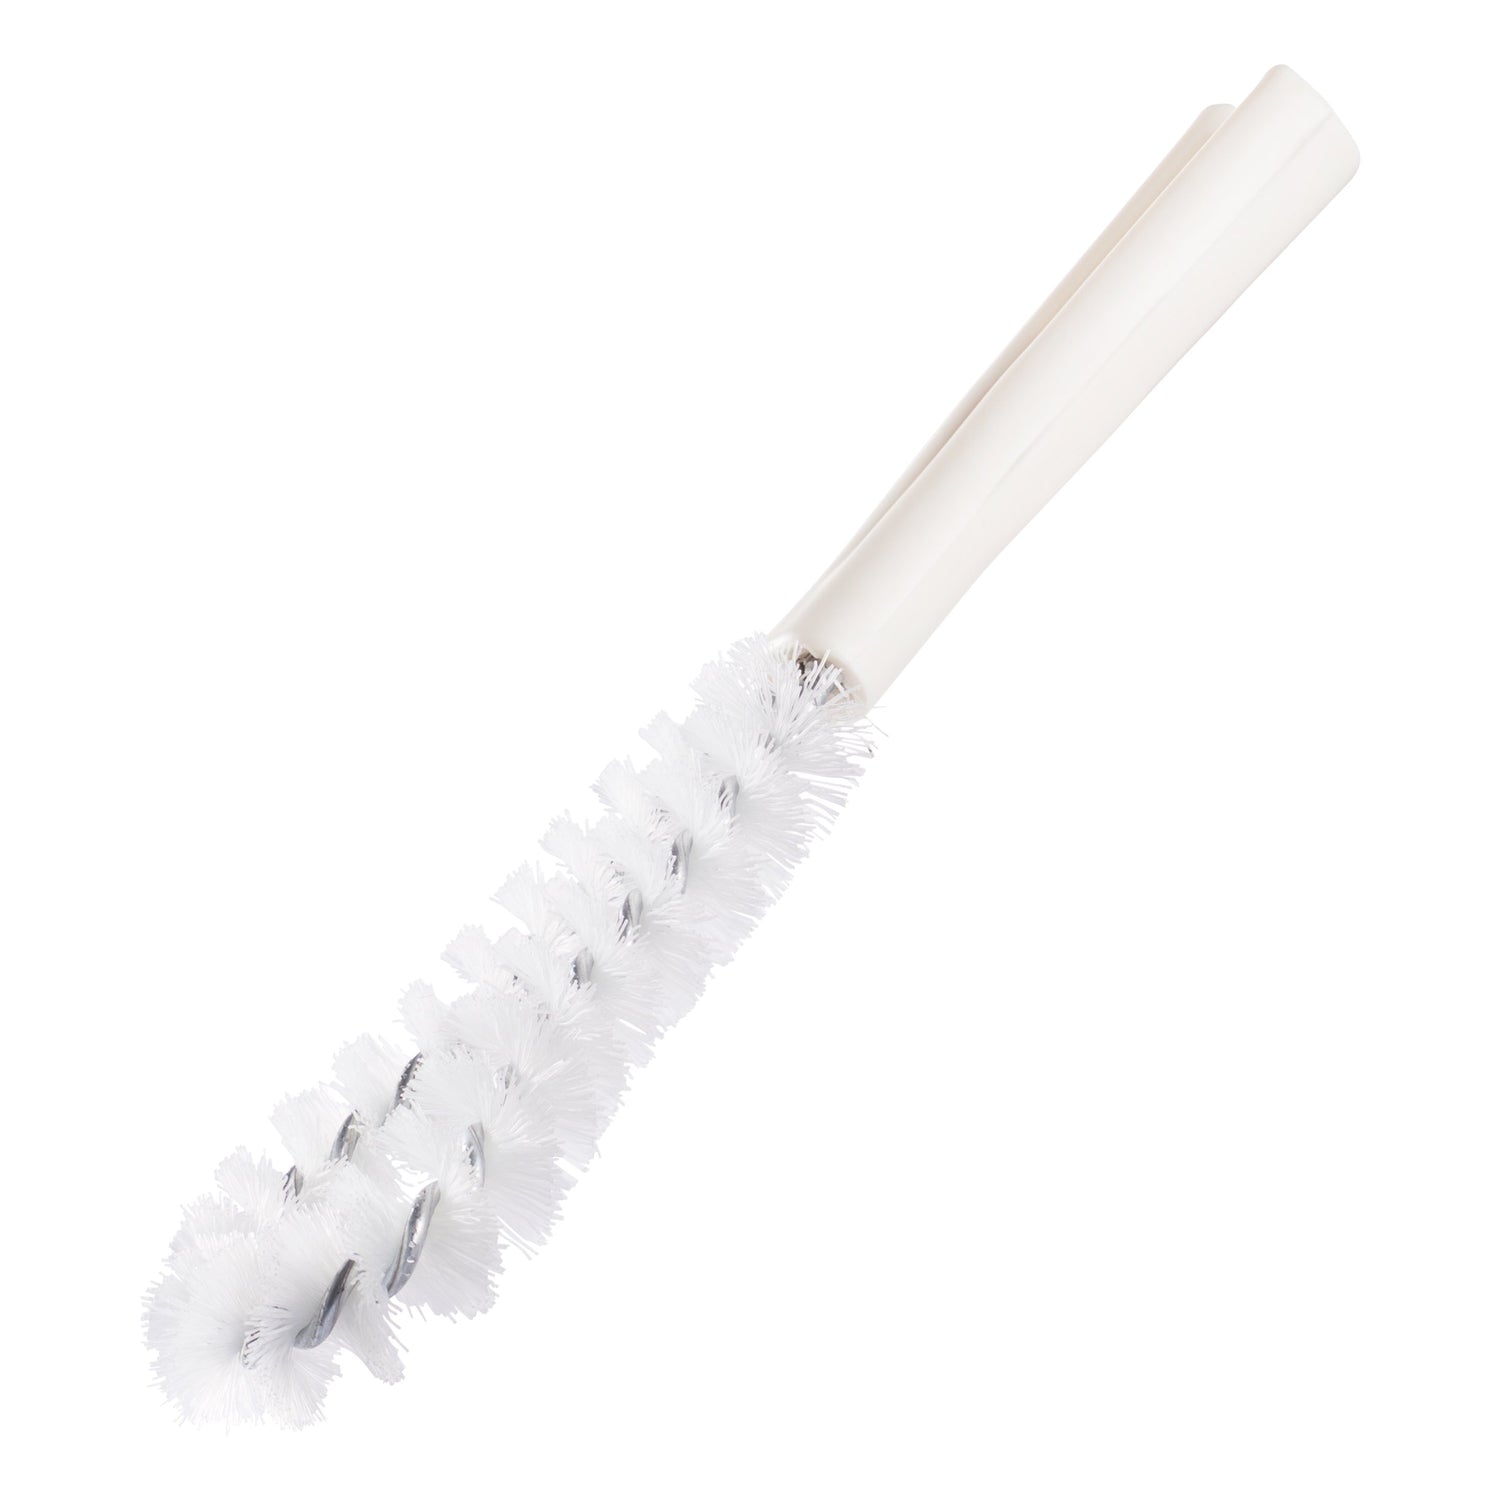 https://fuller.com/cdn/shop/products/dental-plate-brush-maintain-and-care-for-your-dental-plate-rust-resistant-other-cleaning-supplies-3_1500x1500.jpg?v=1596017372